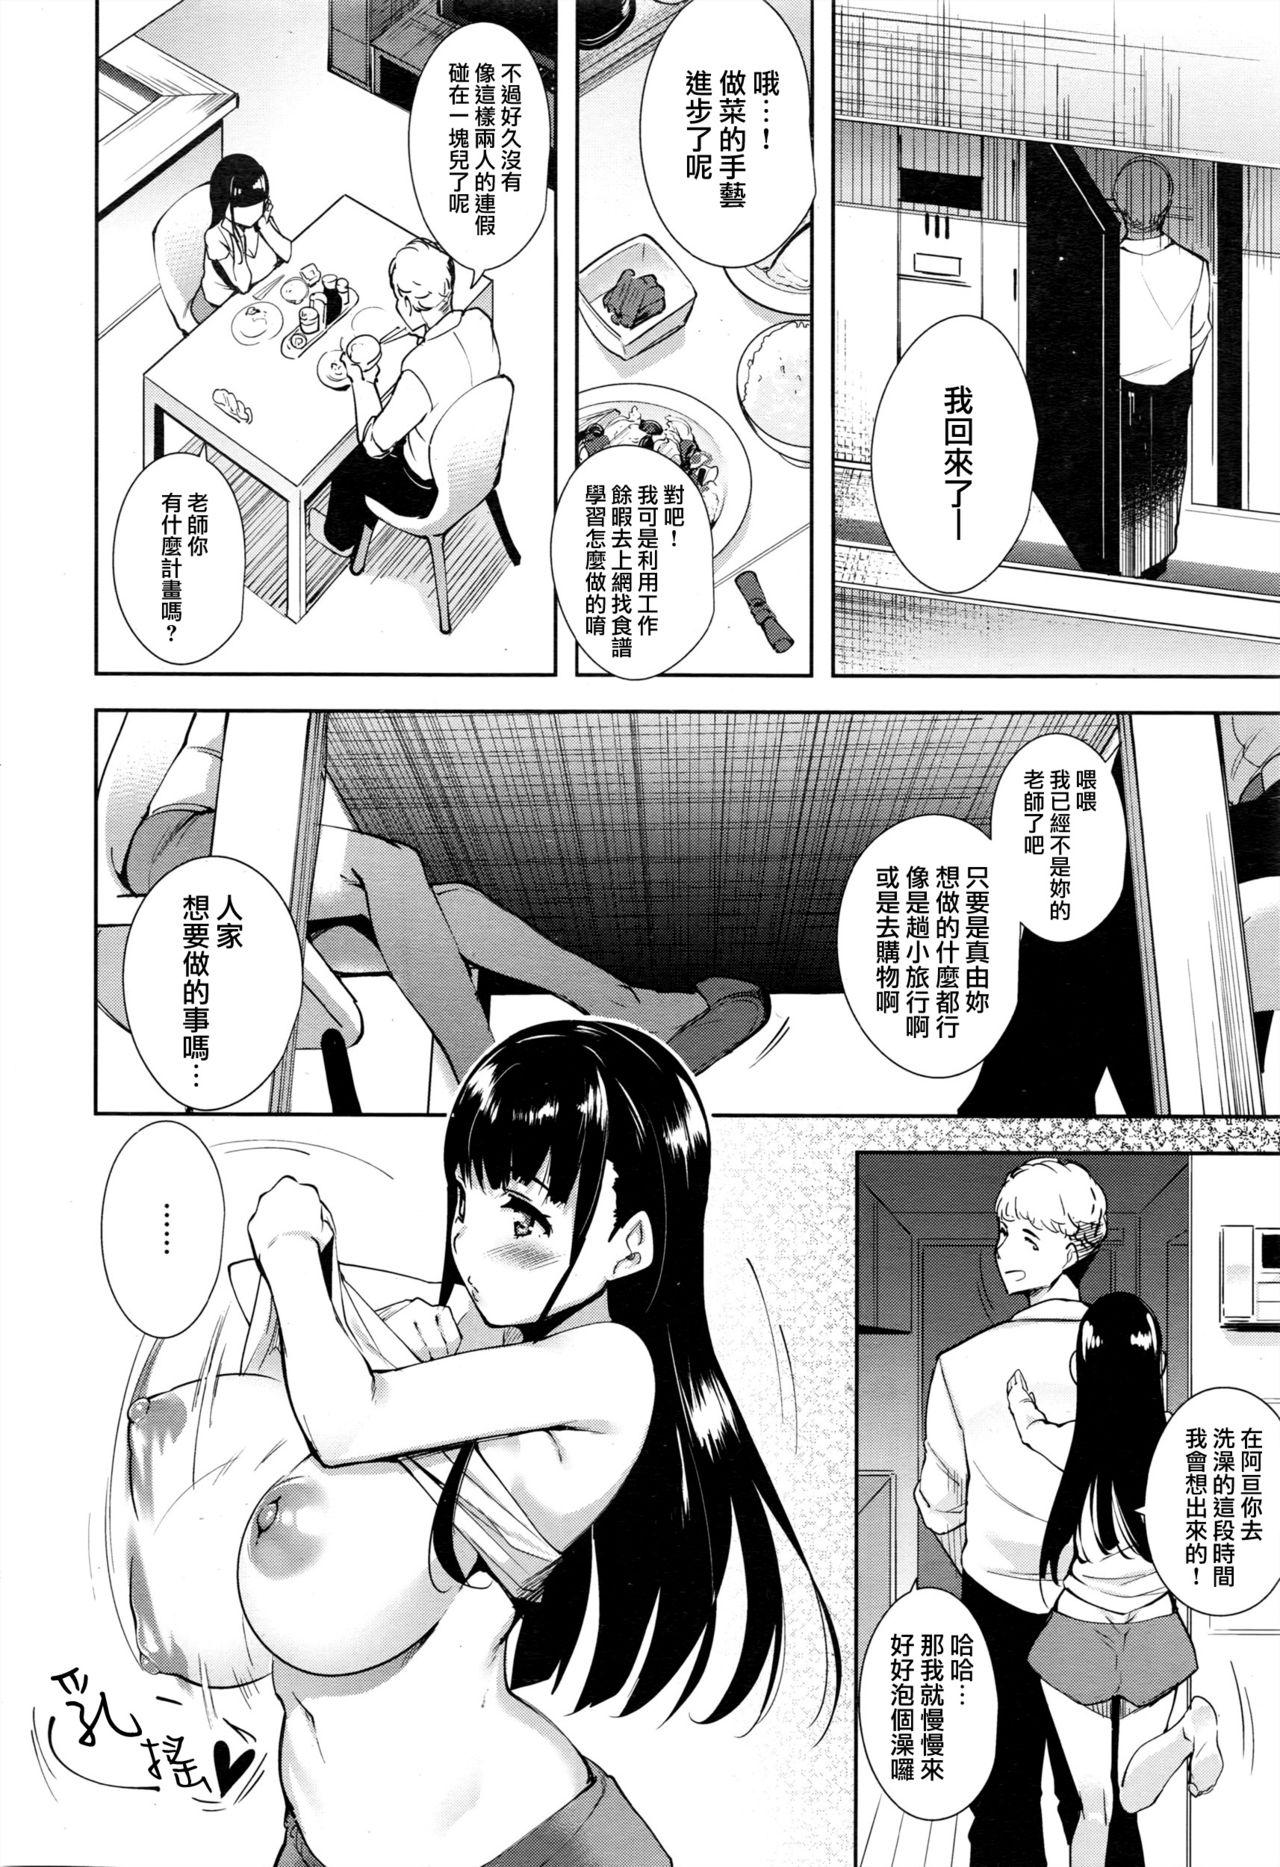 Str8 Reproduction Incident Jav - Page 5